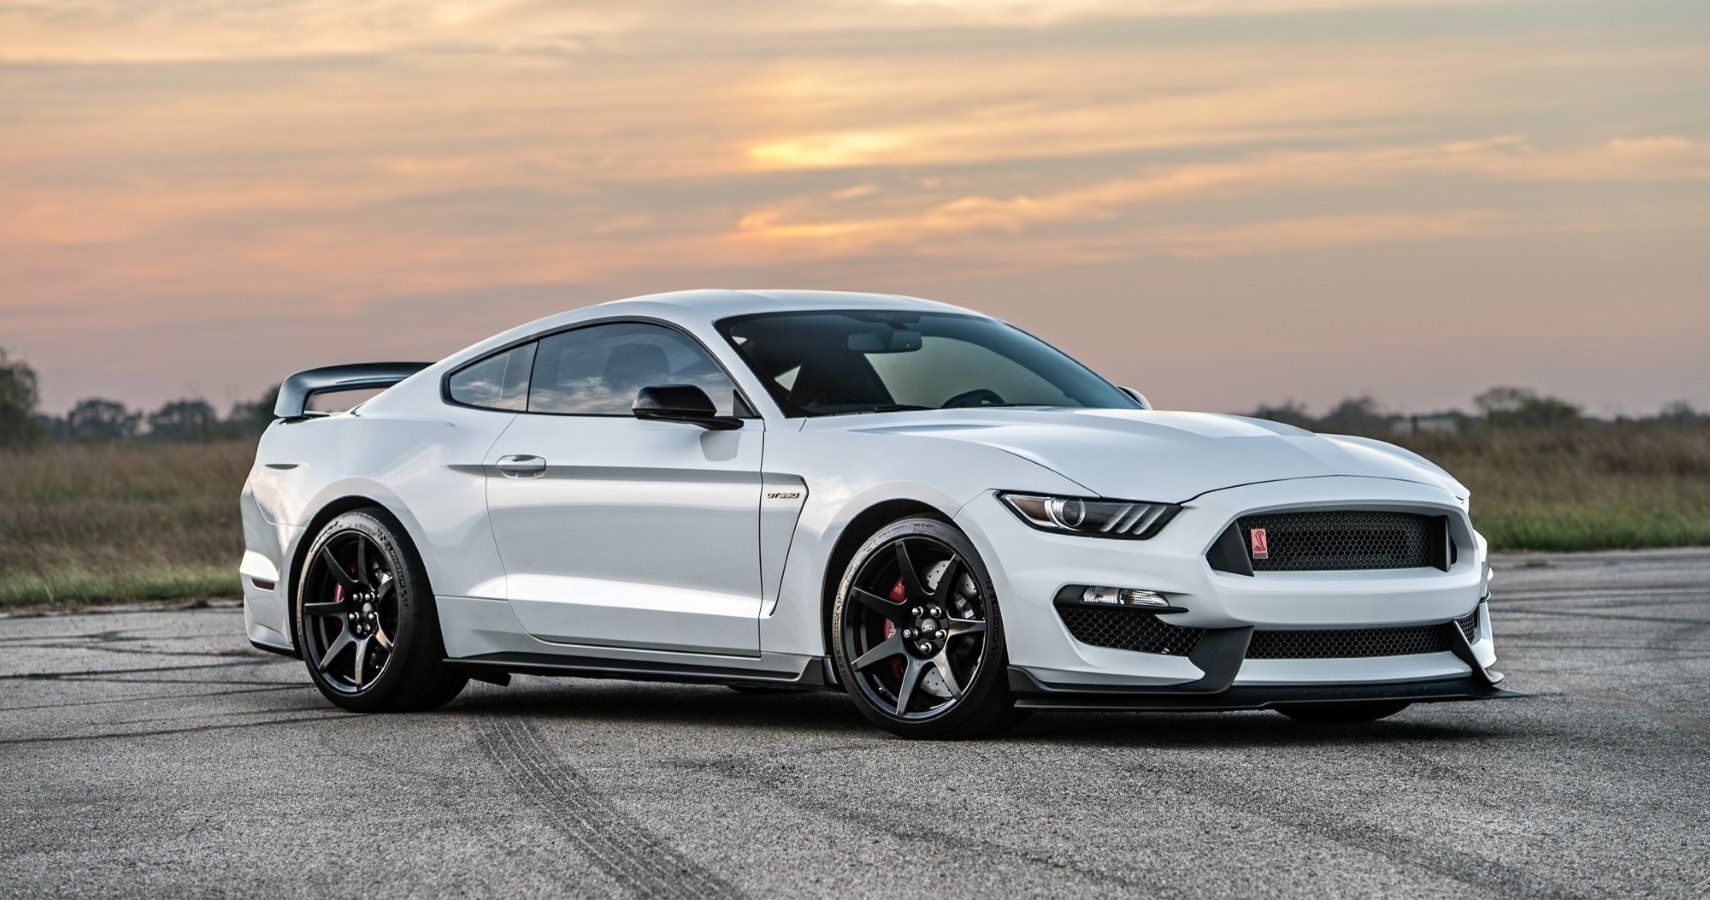 Check Out Hennessey’s Insane 850 HP Mustang In Action